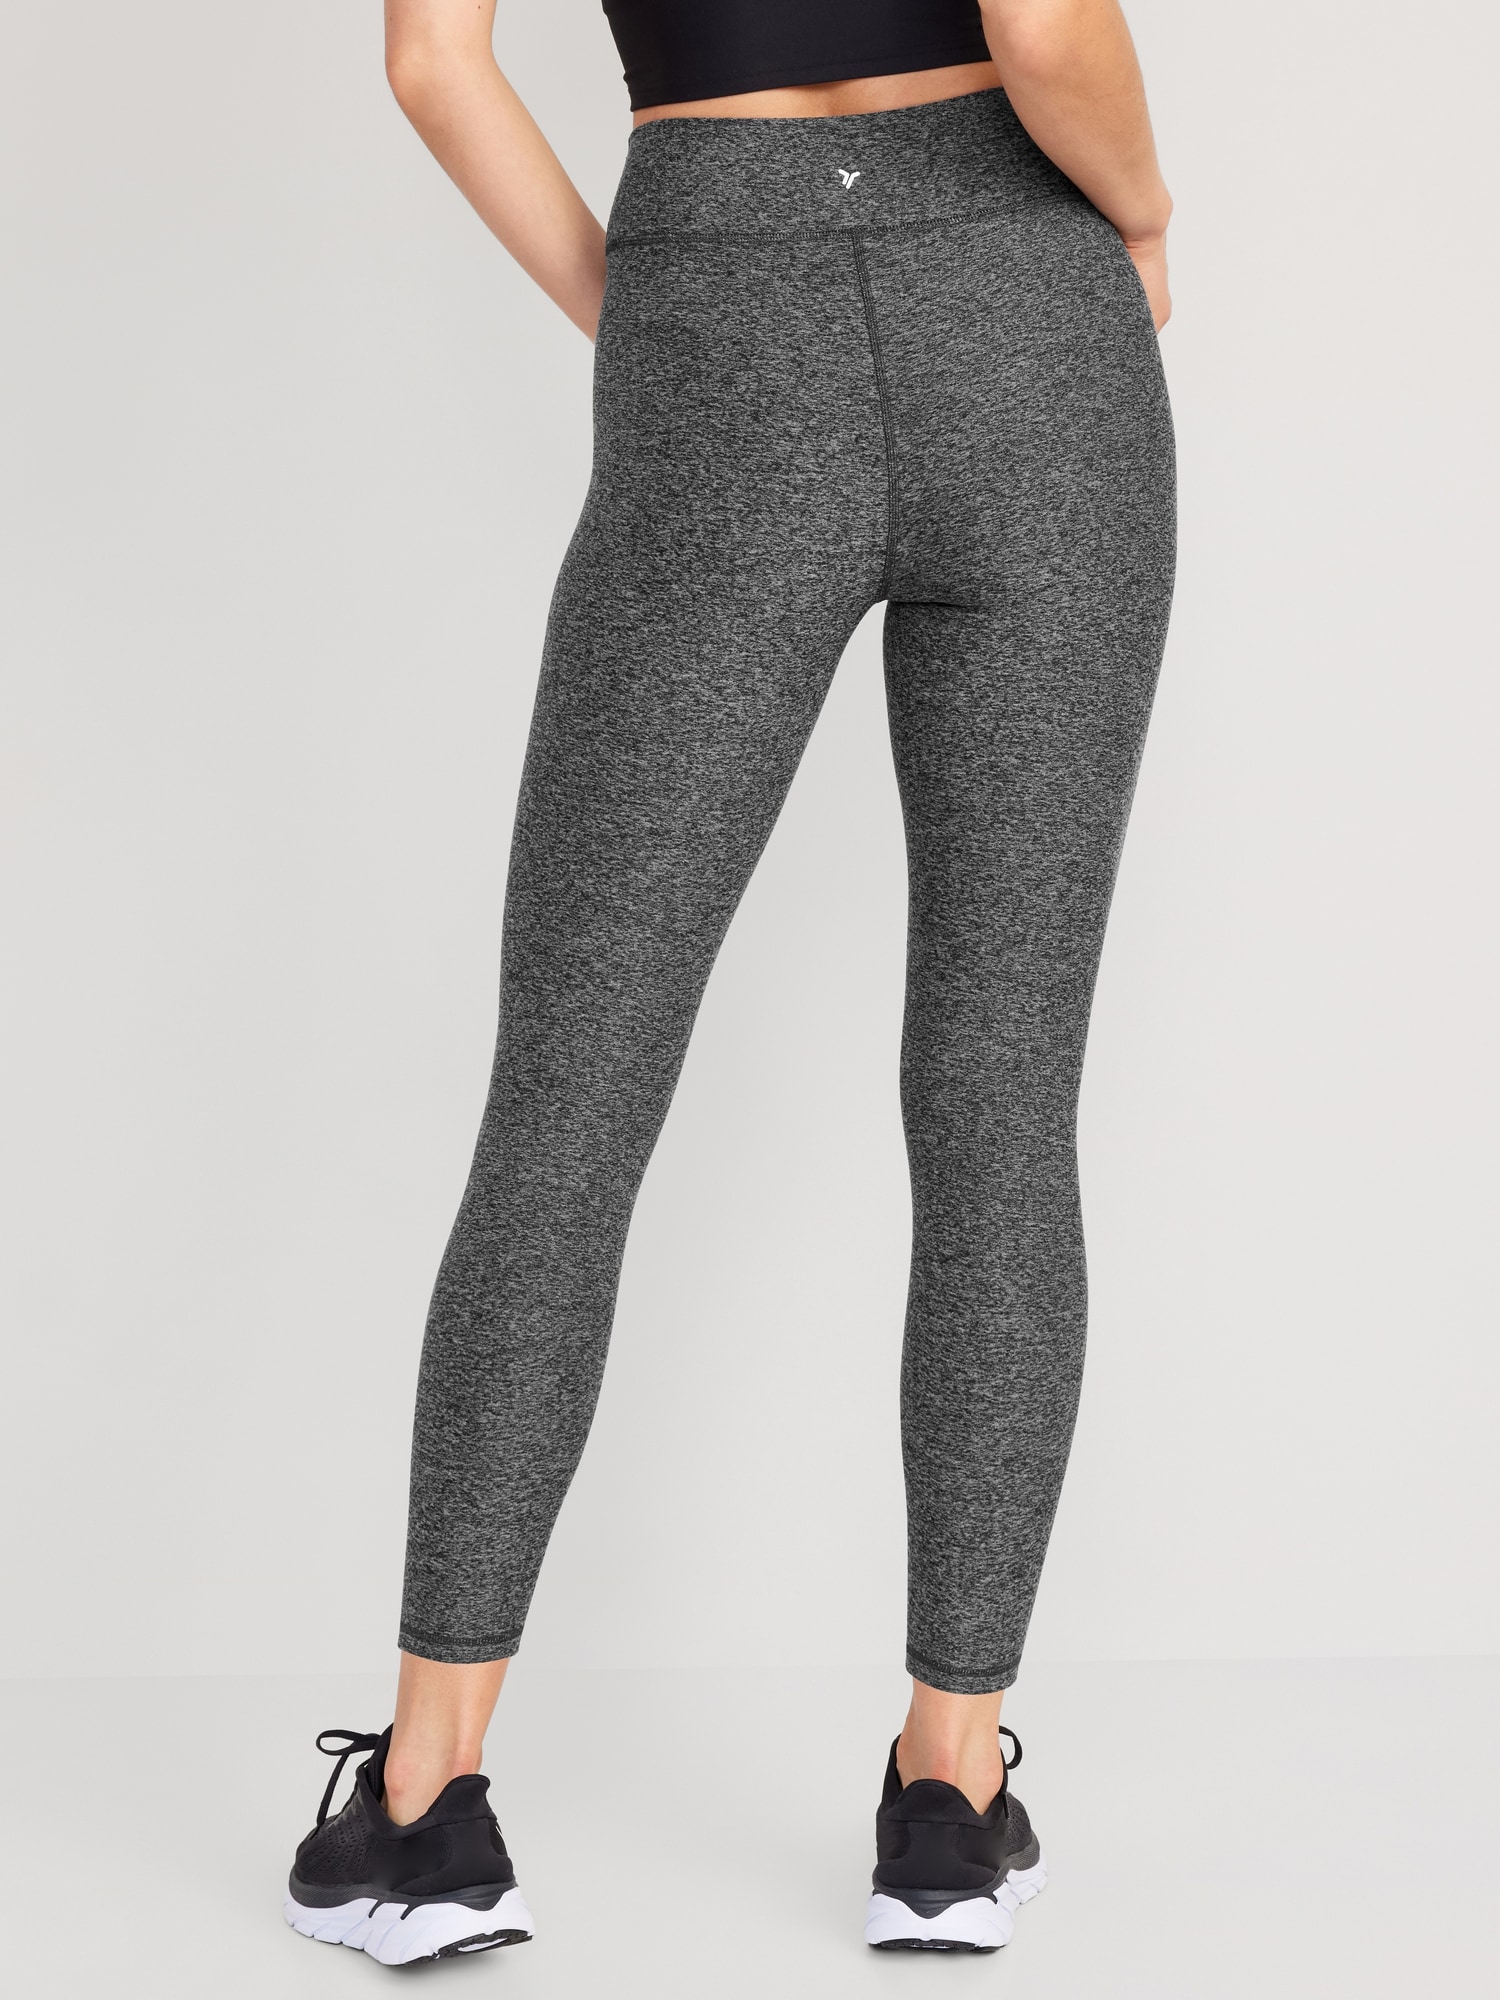 Dex Curvy Collection Black High waisted Pull up legging. – This Is Made